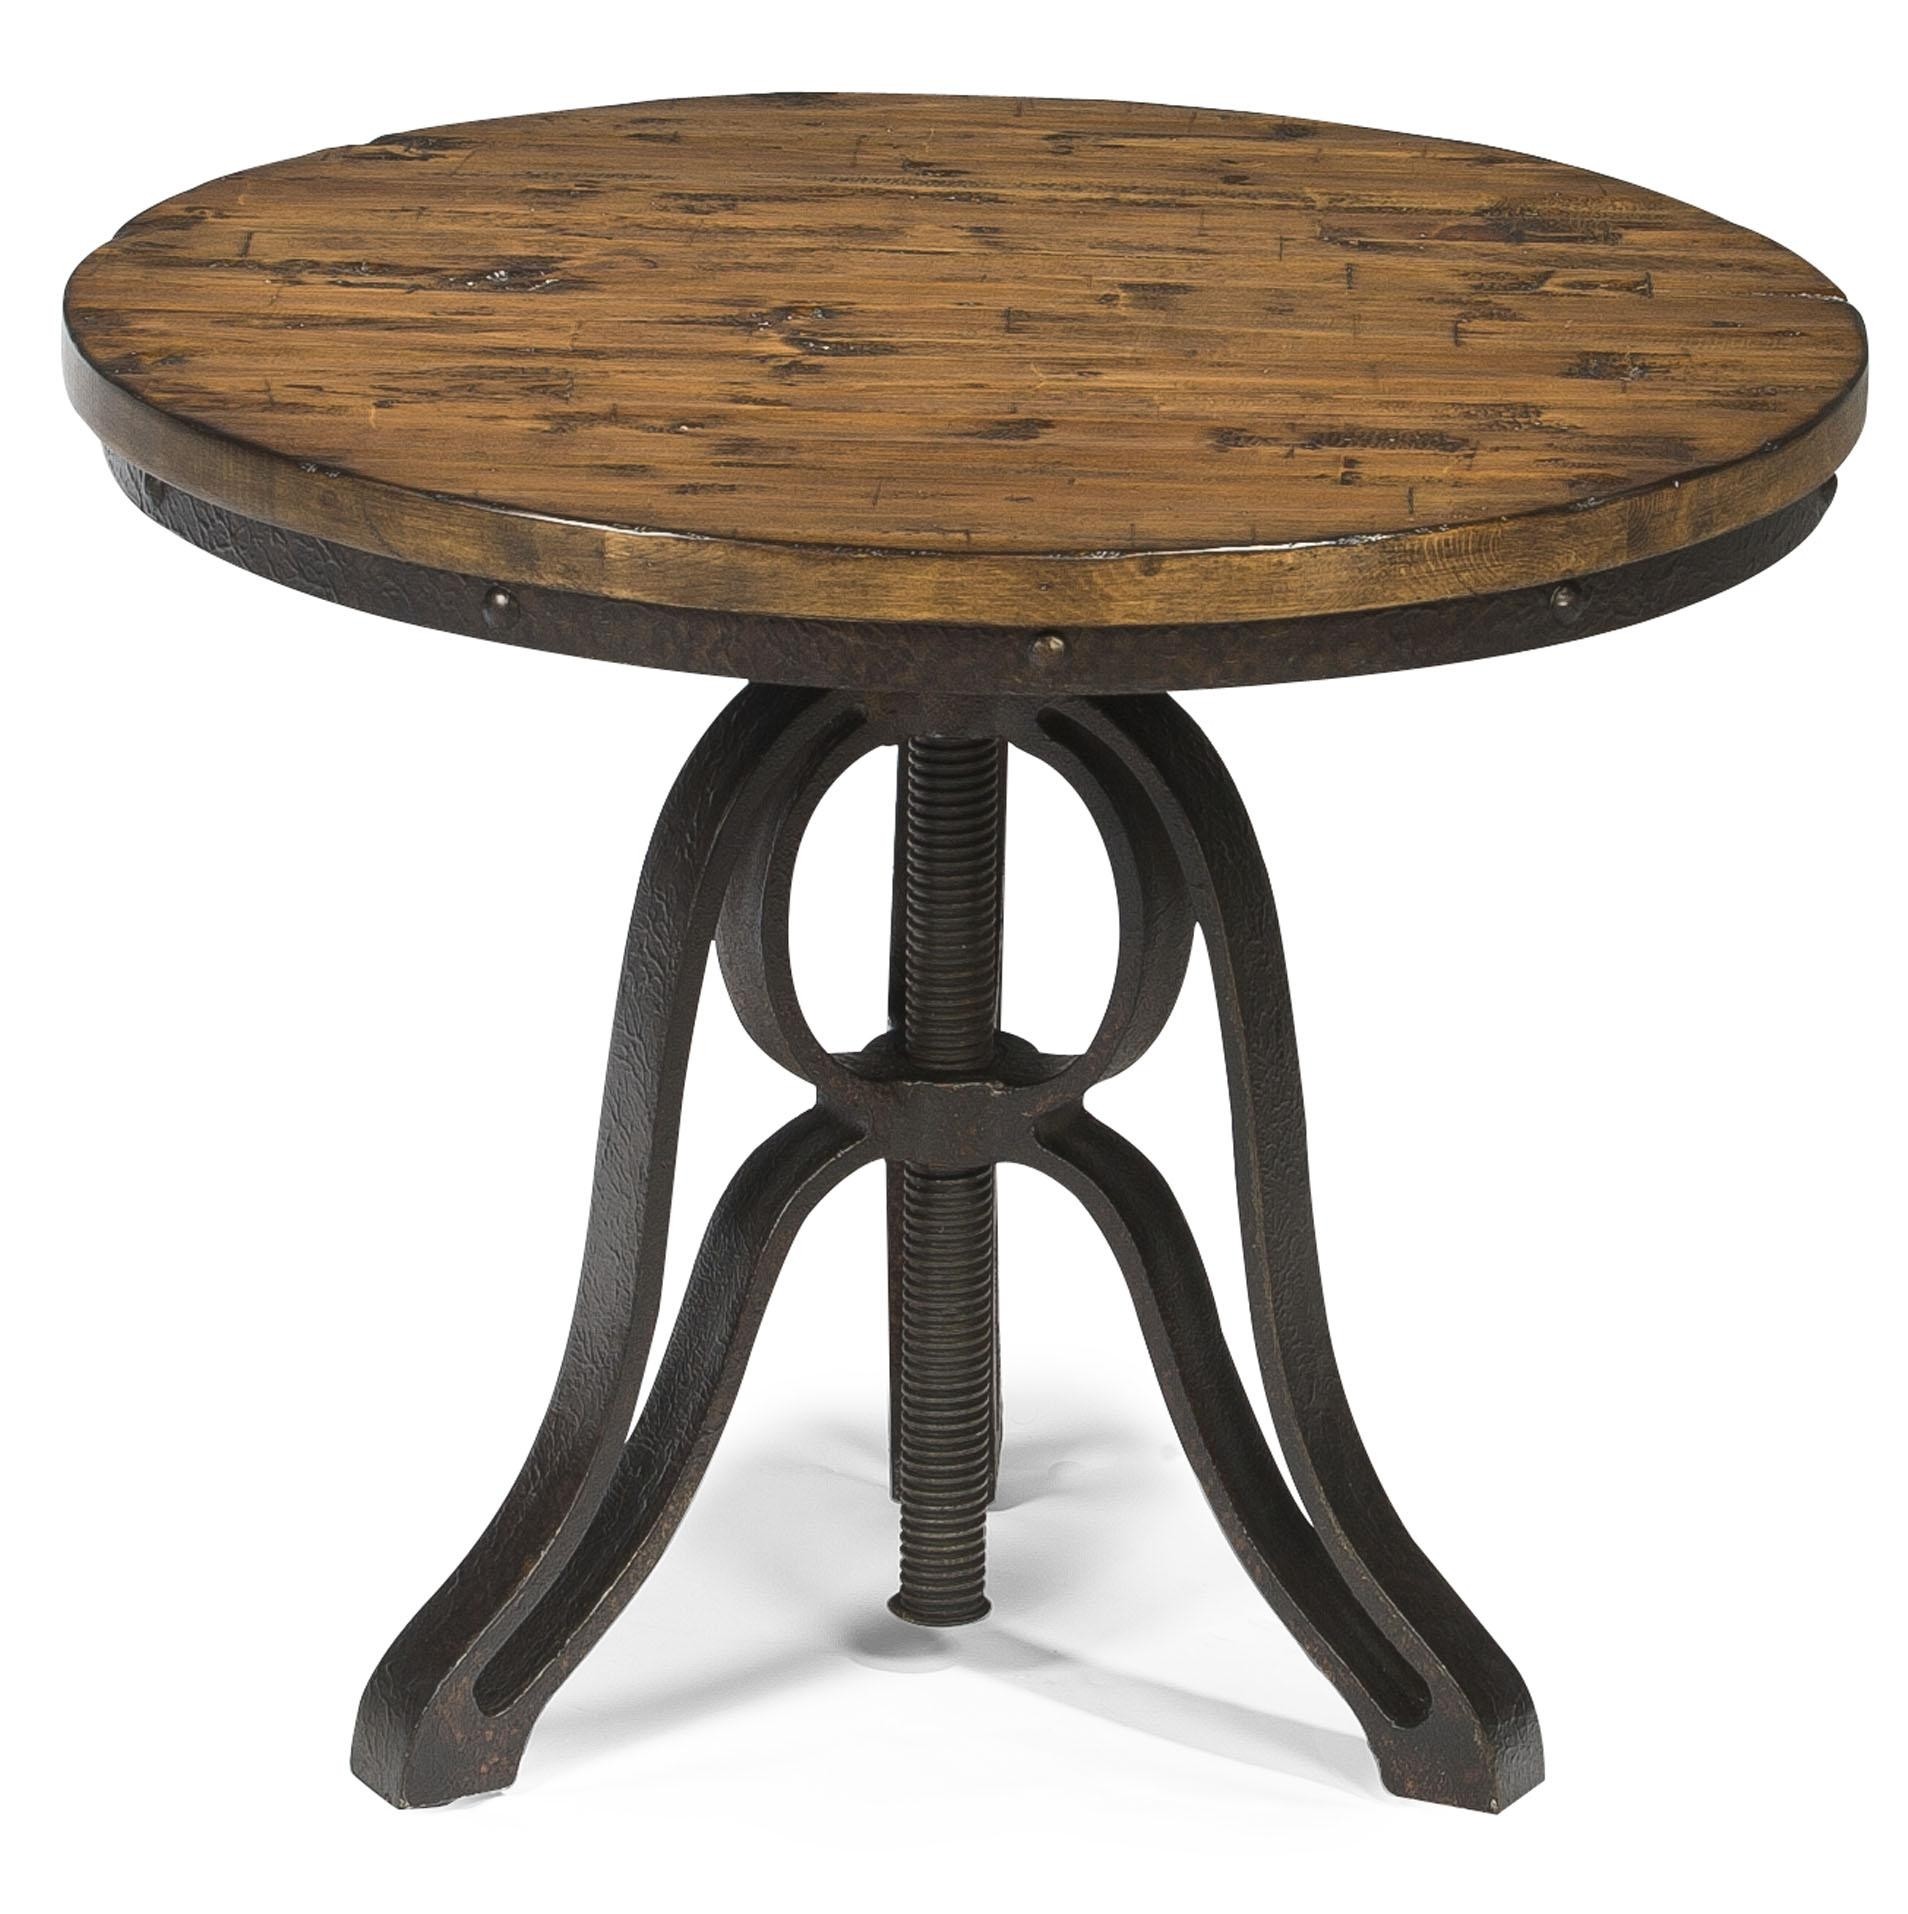 Magnussen home cranfill industrial style round end table